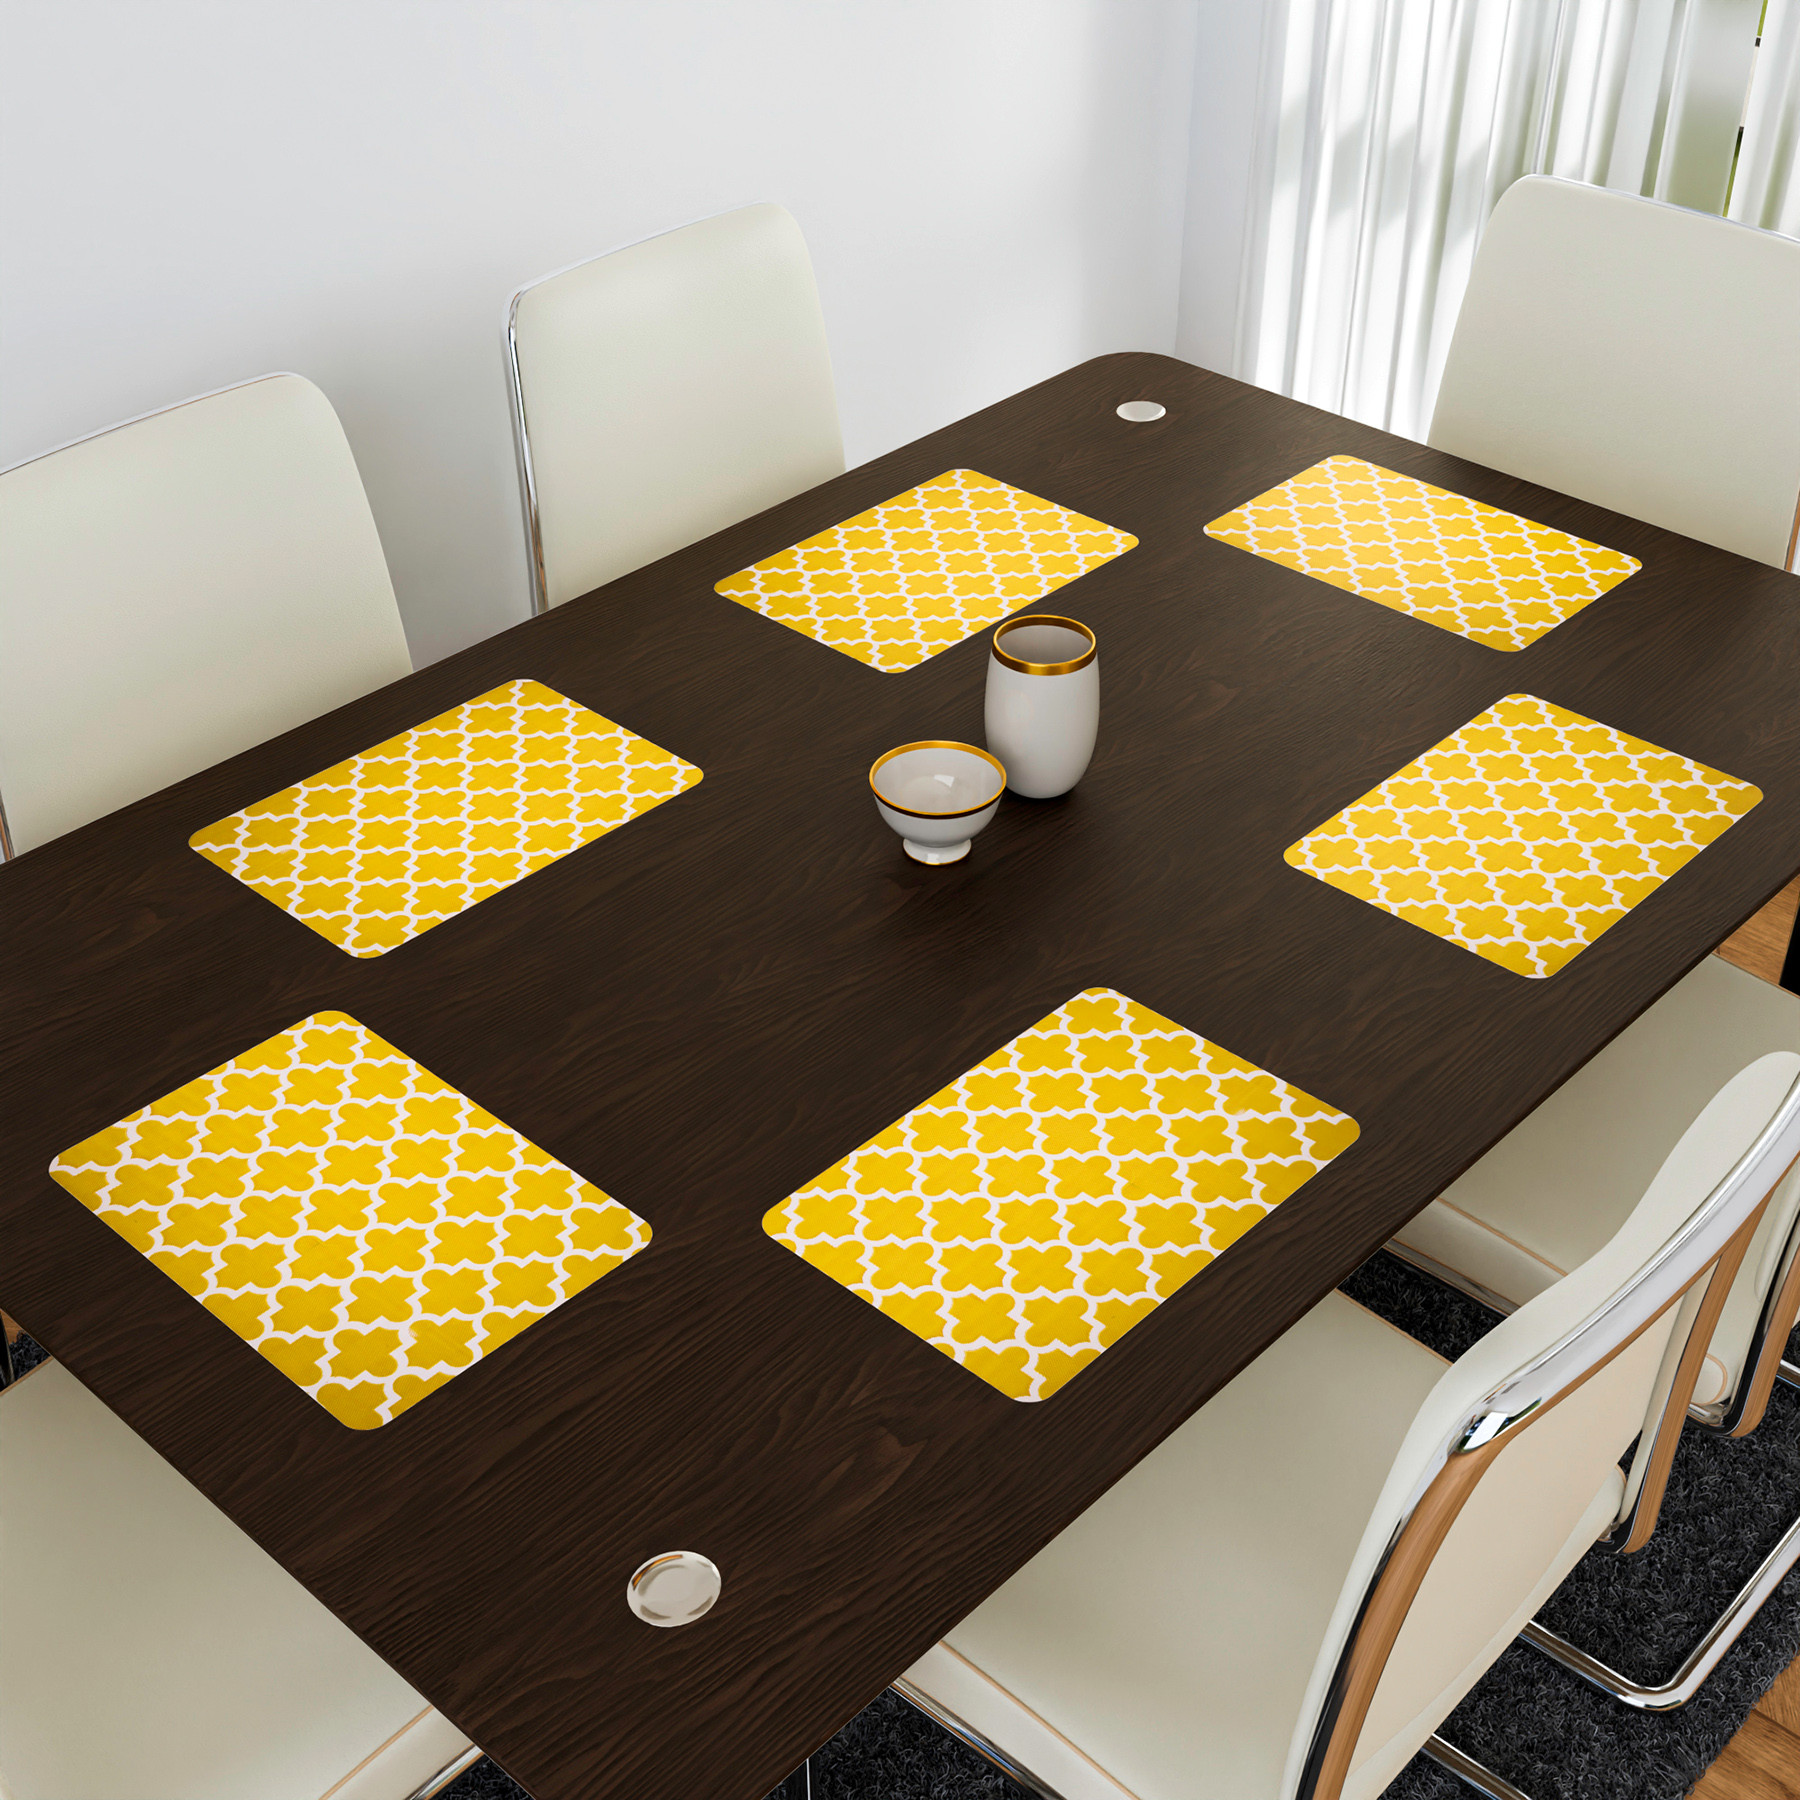 Kuber Industries Placemat | Placemats for Dining Room | Anti-Slip Table Mat Set | Placemats for Kitchen Table | Dining Table Placemats | Hexagon-Design Placemat | 6 Piece Set | Yellow